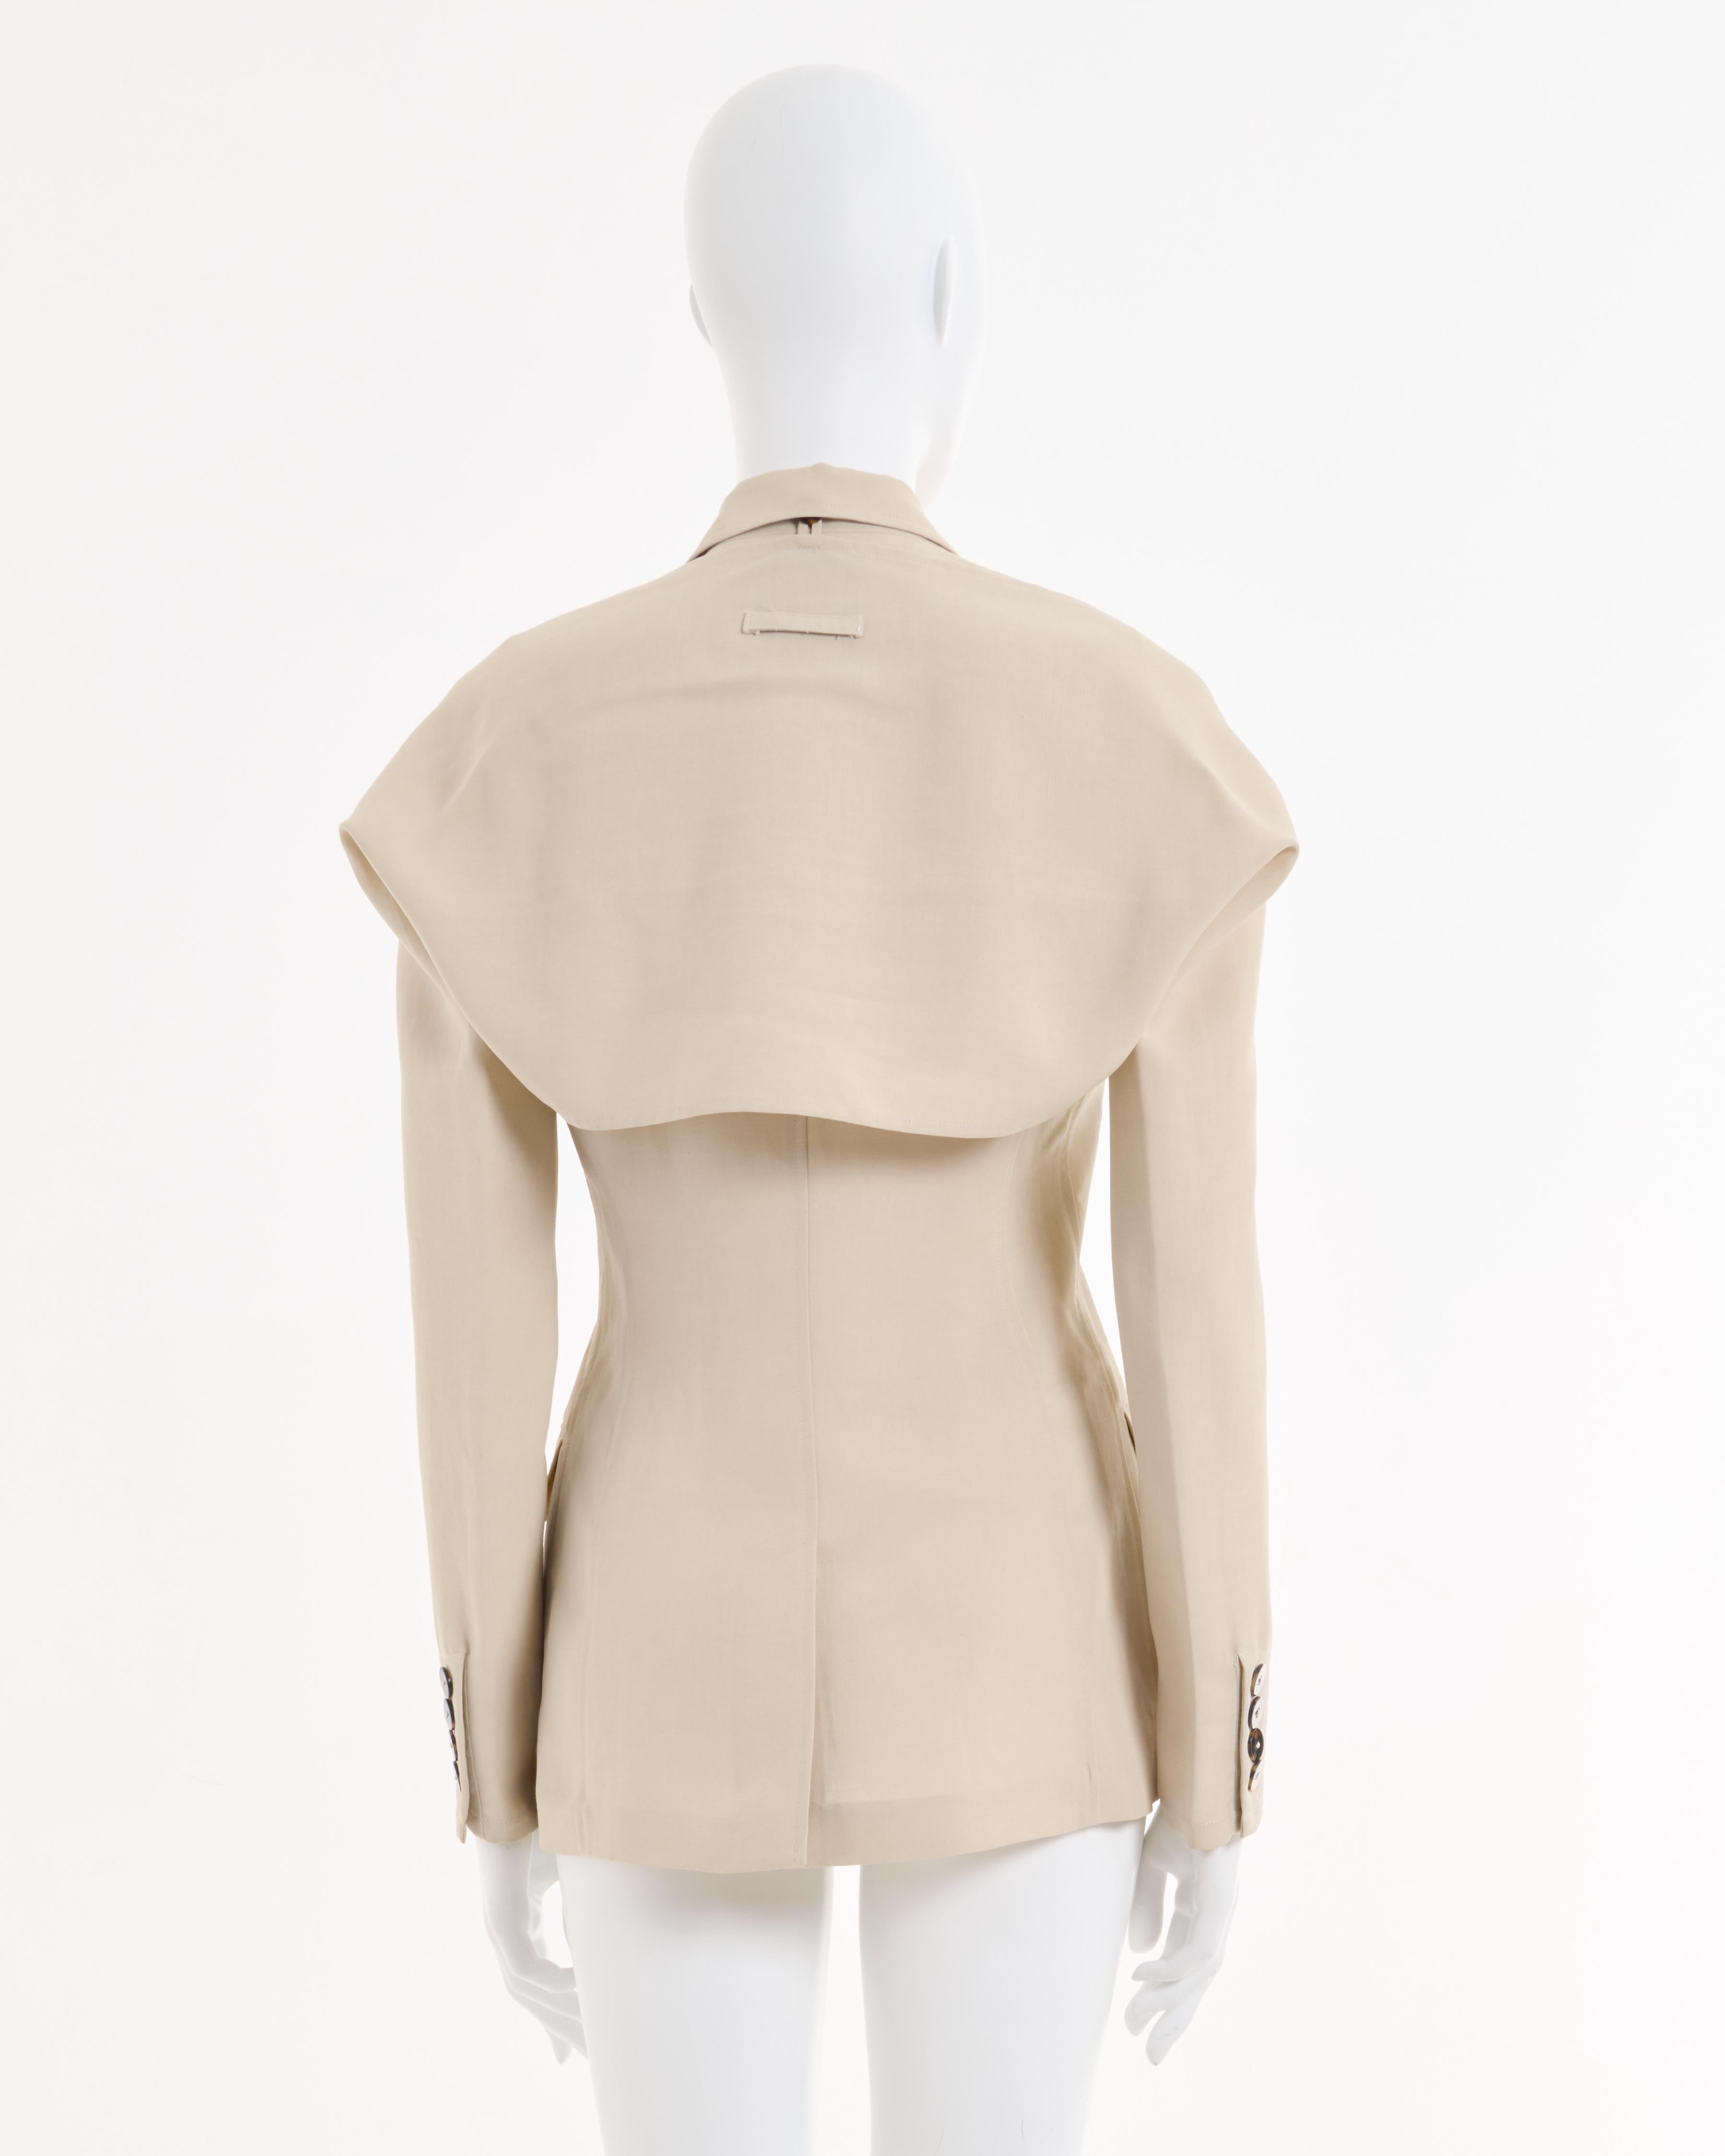 Jean Paul Gaultier F/W 1997 Cream linen double breasted blazer two pieces jacket In Excellent Condition For Sale In Milano, IT